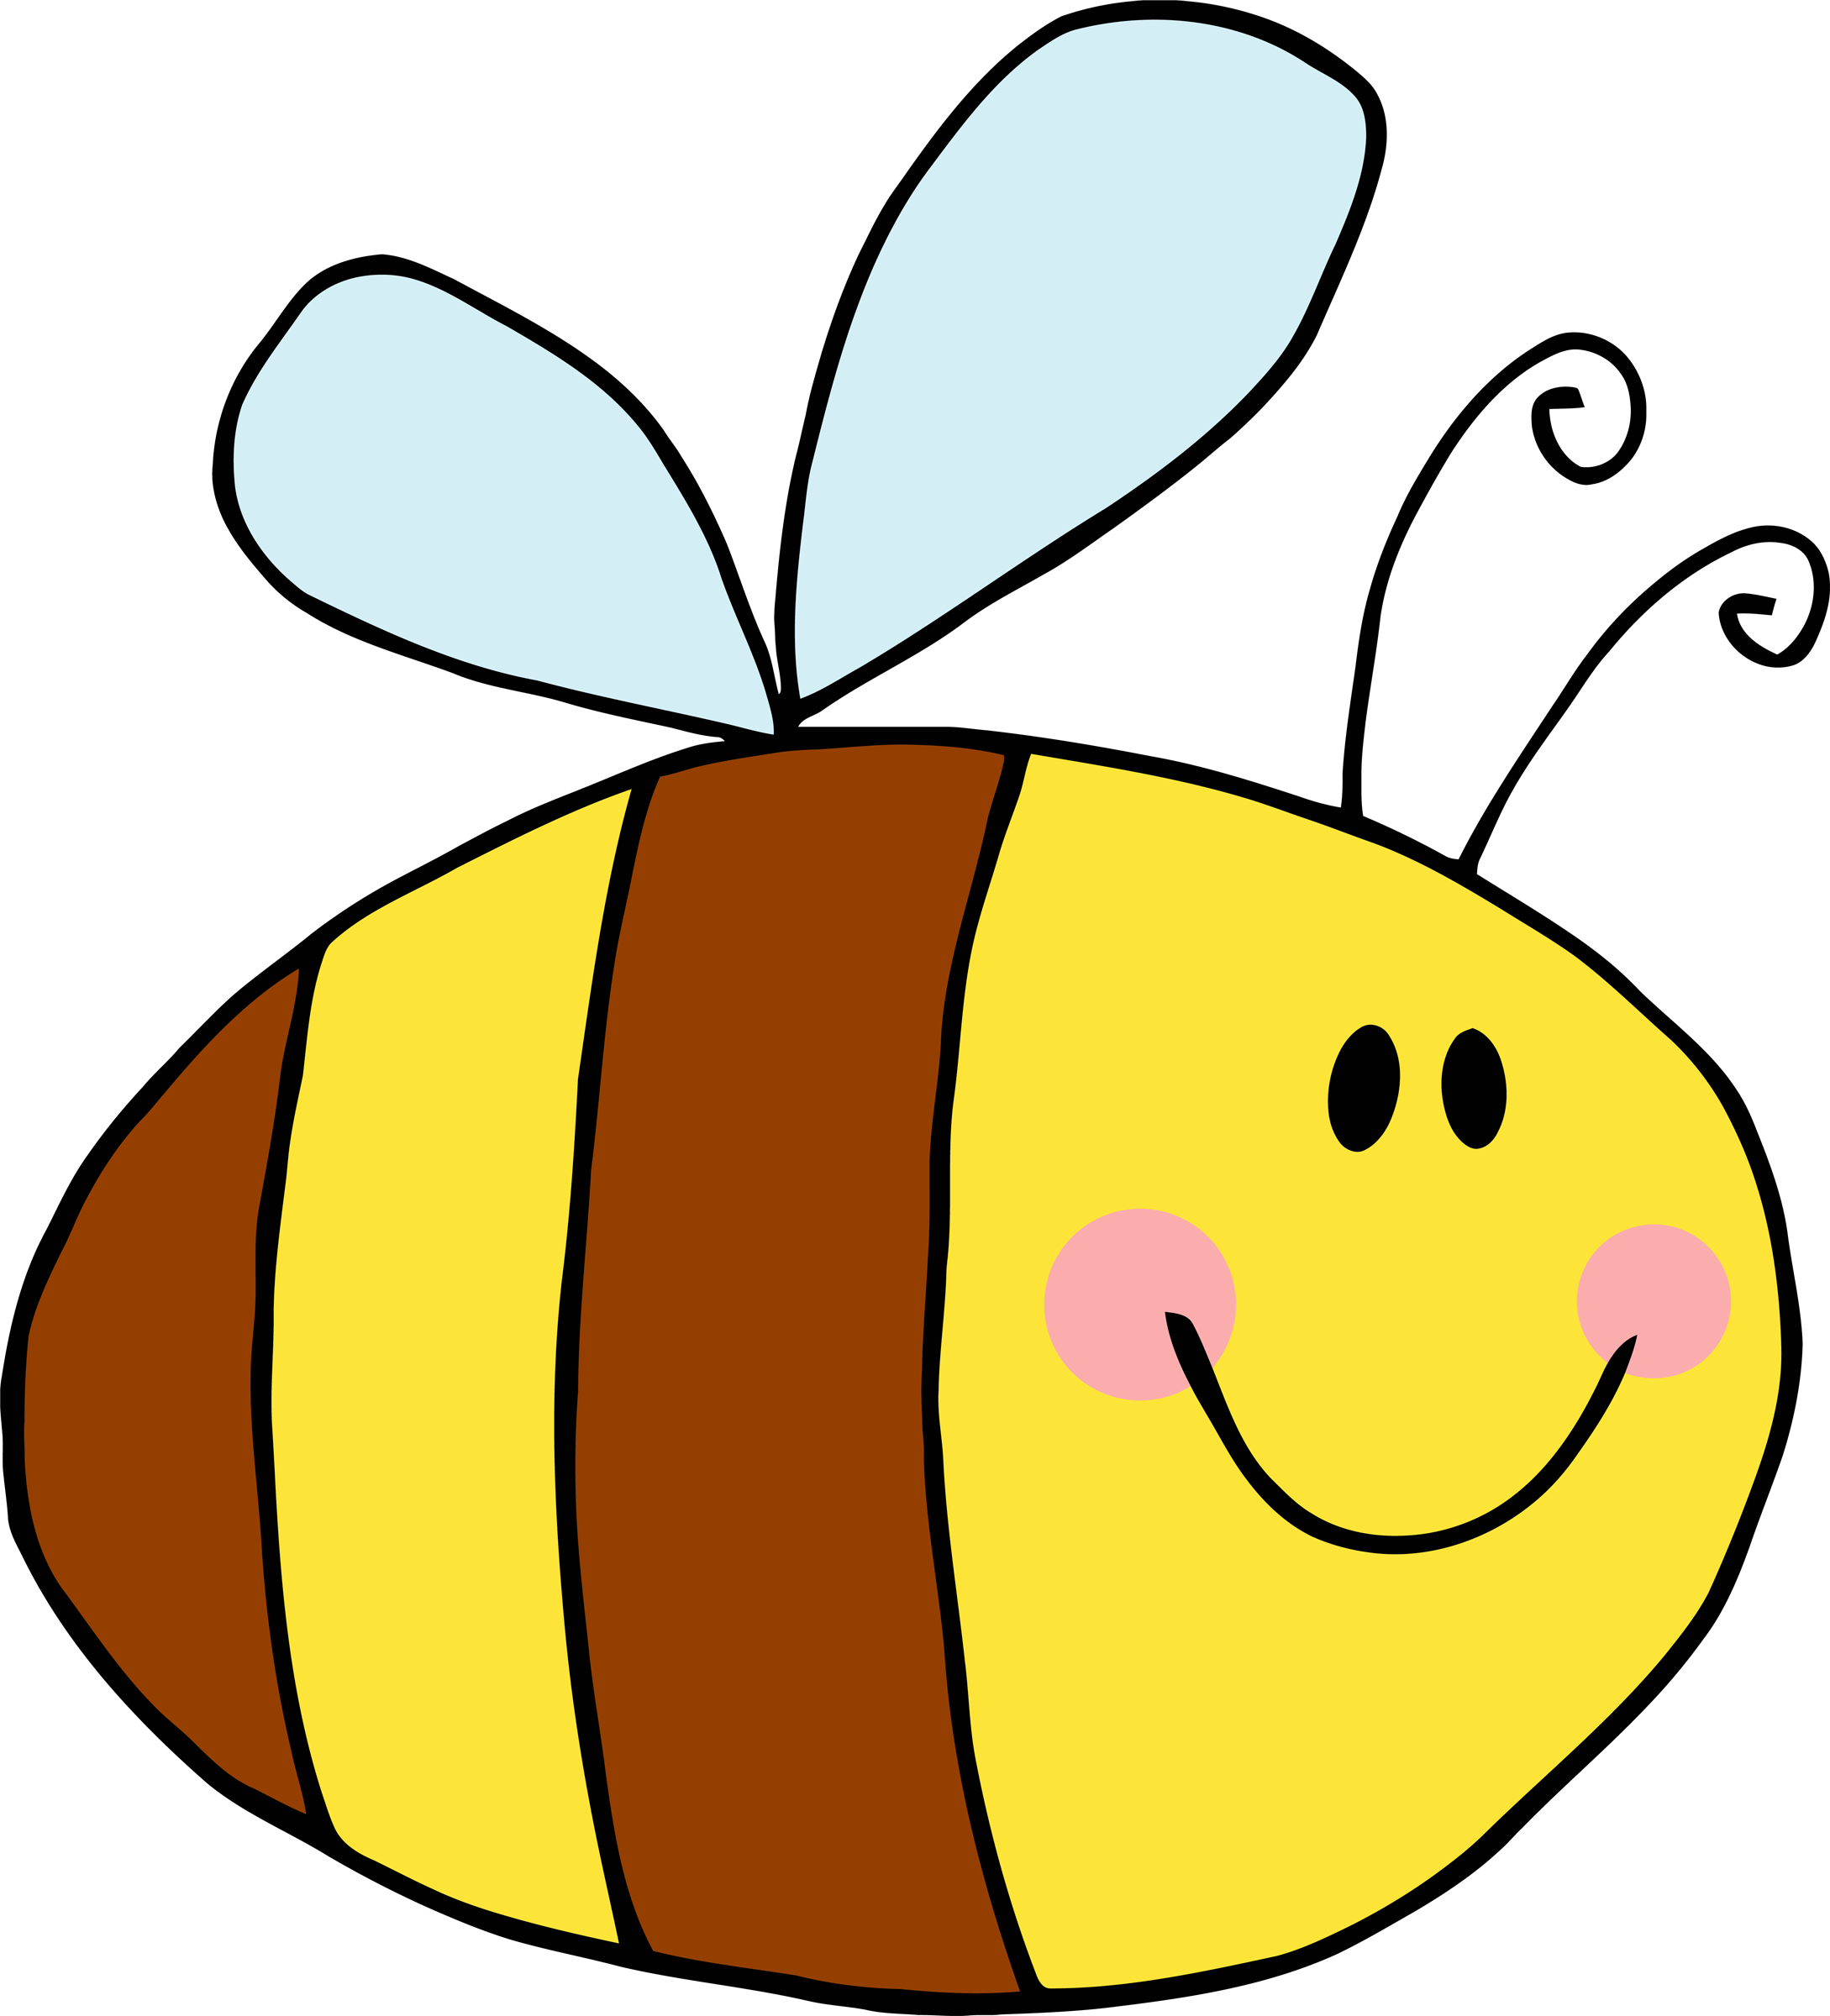 Free Bees Picture Cartoon, Download Free Clip Art, Free Clip Art on Clipart Library